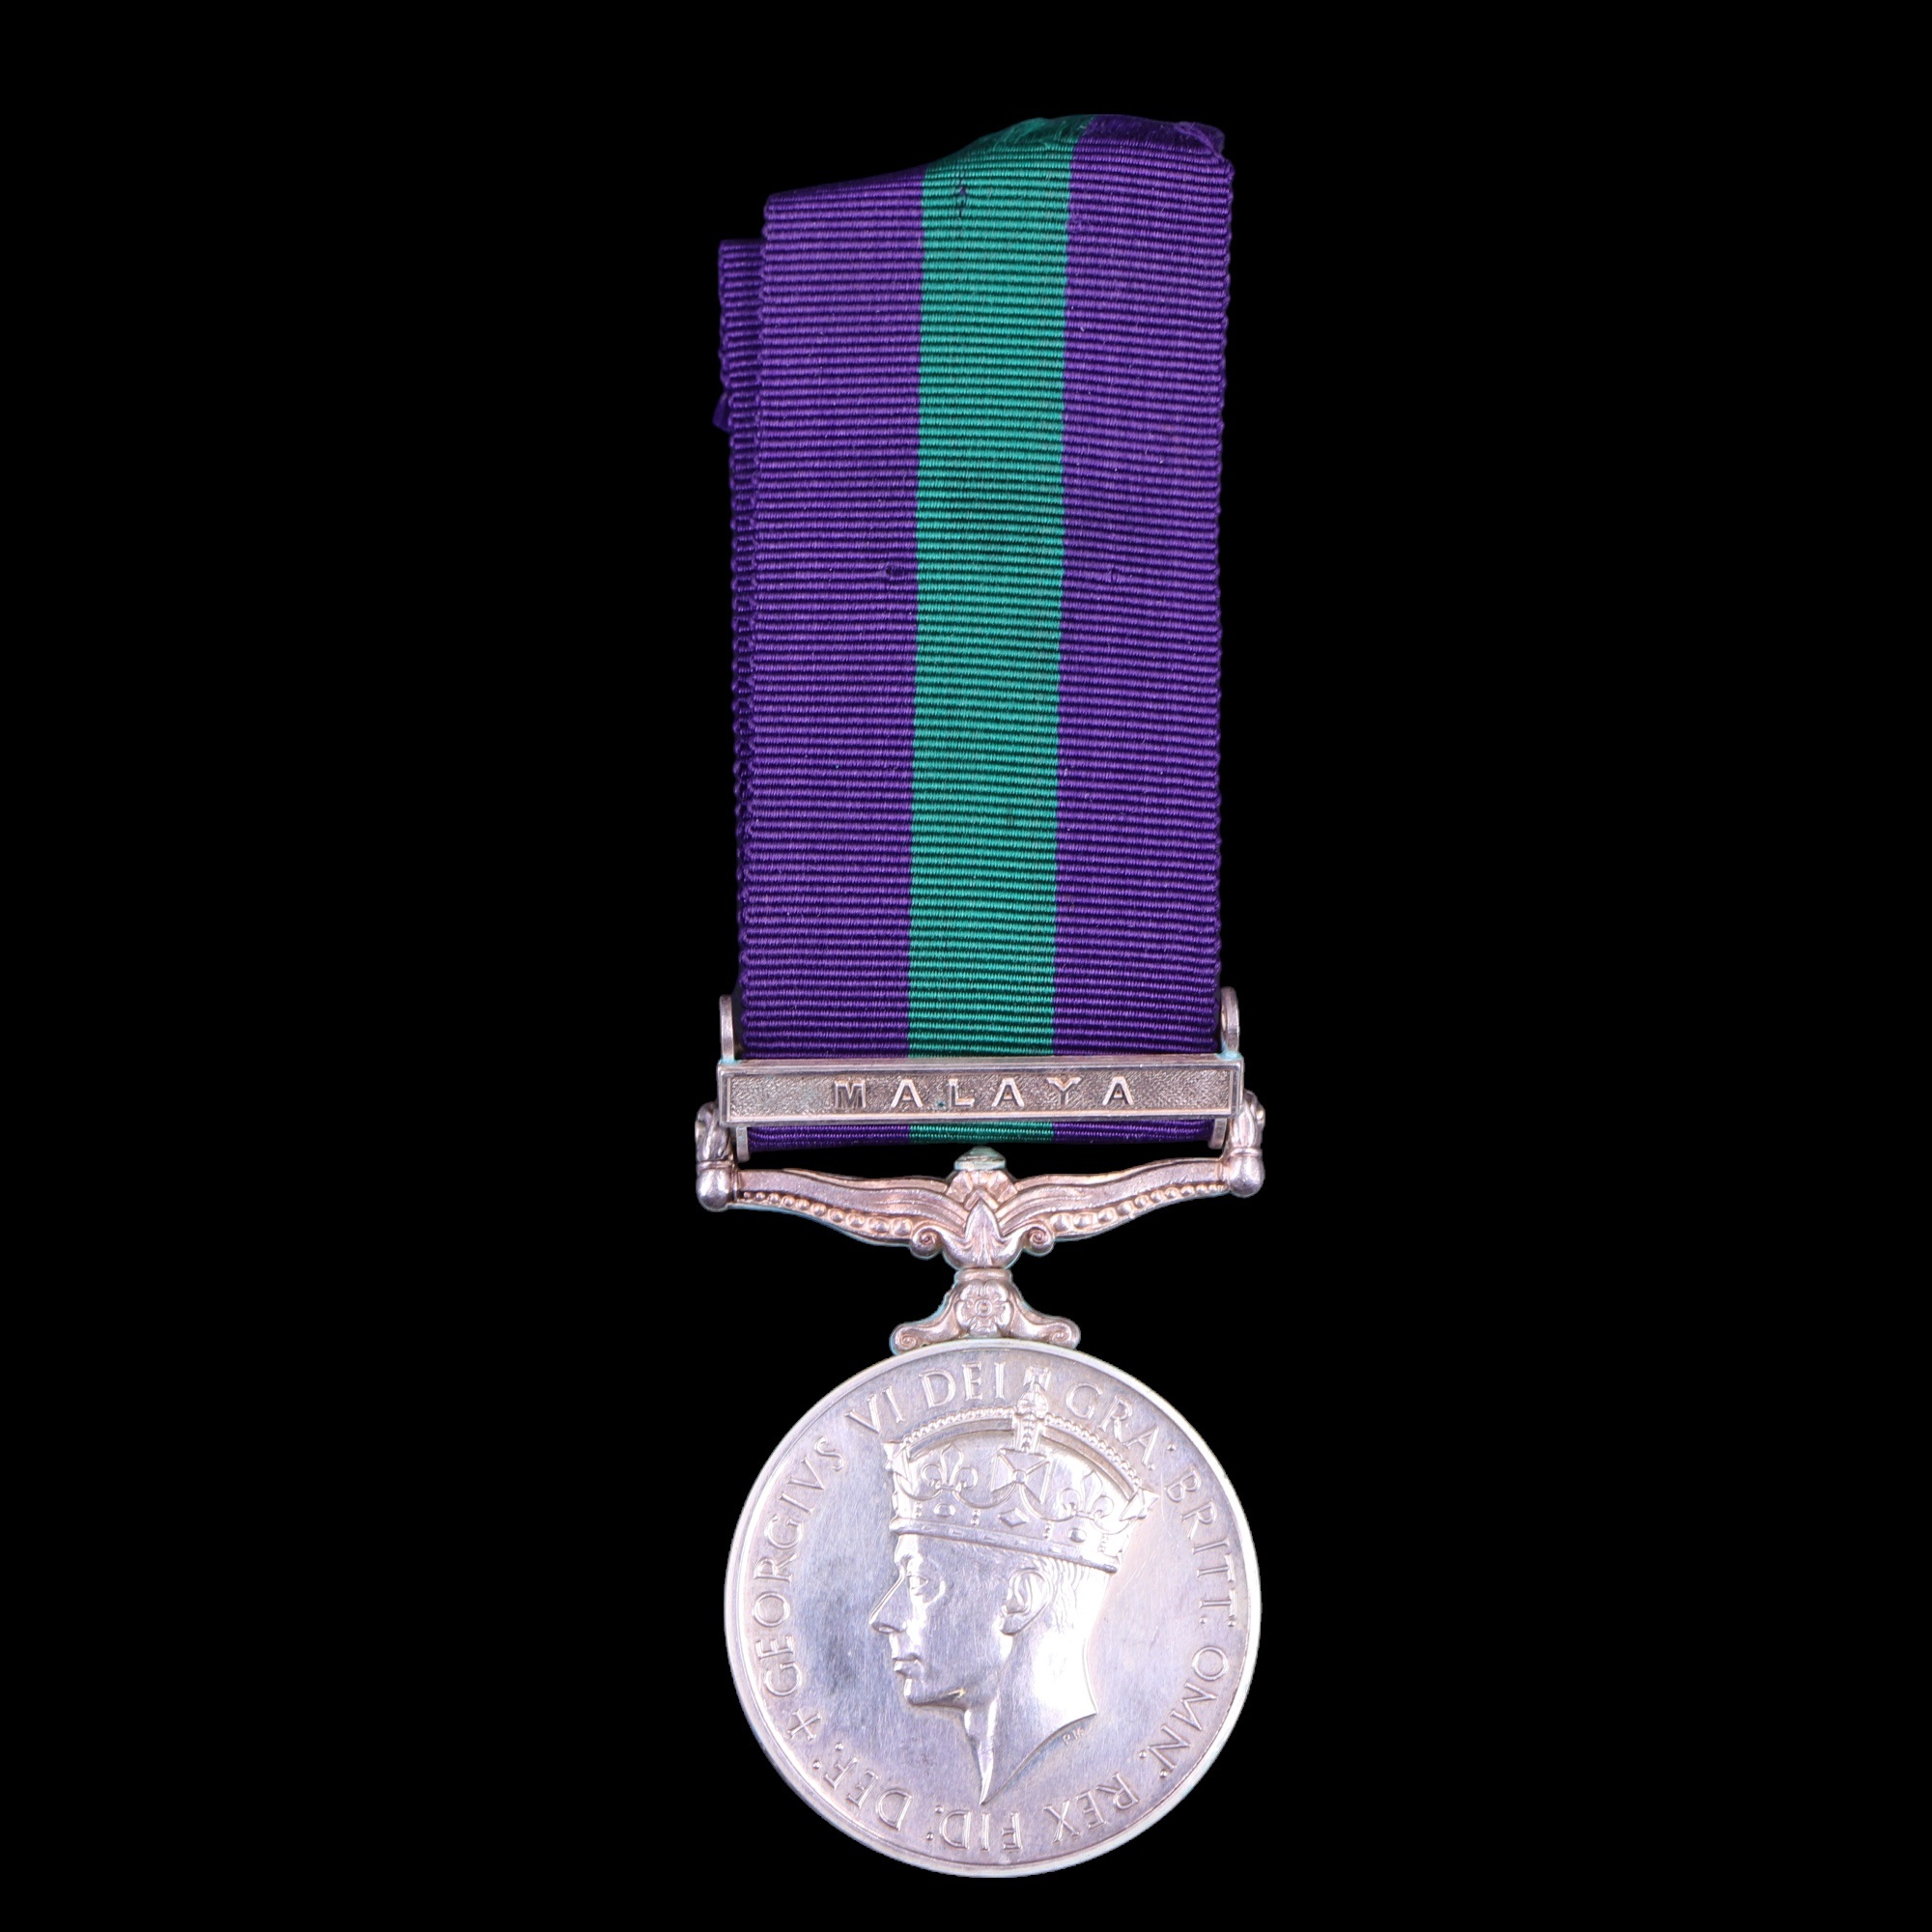 A General Service Medal with Malaya clasp to 19032033 Pte B Byers, Devonshire Regiment